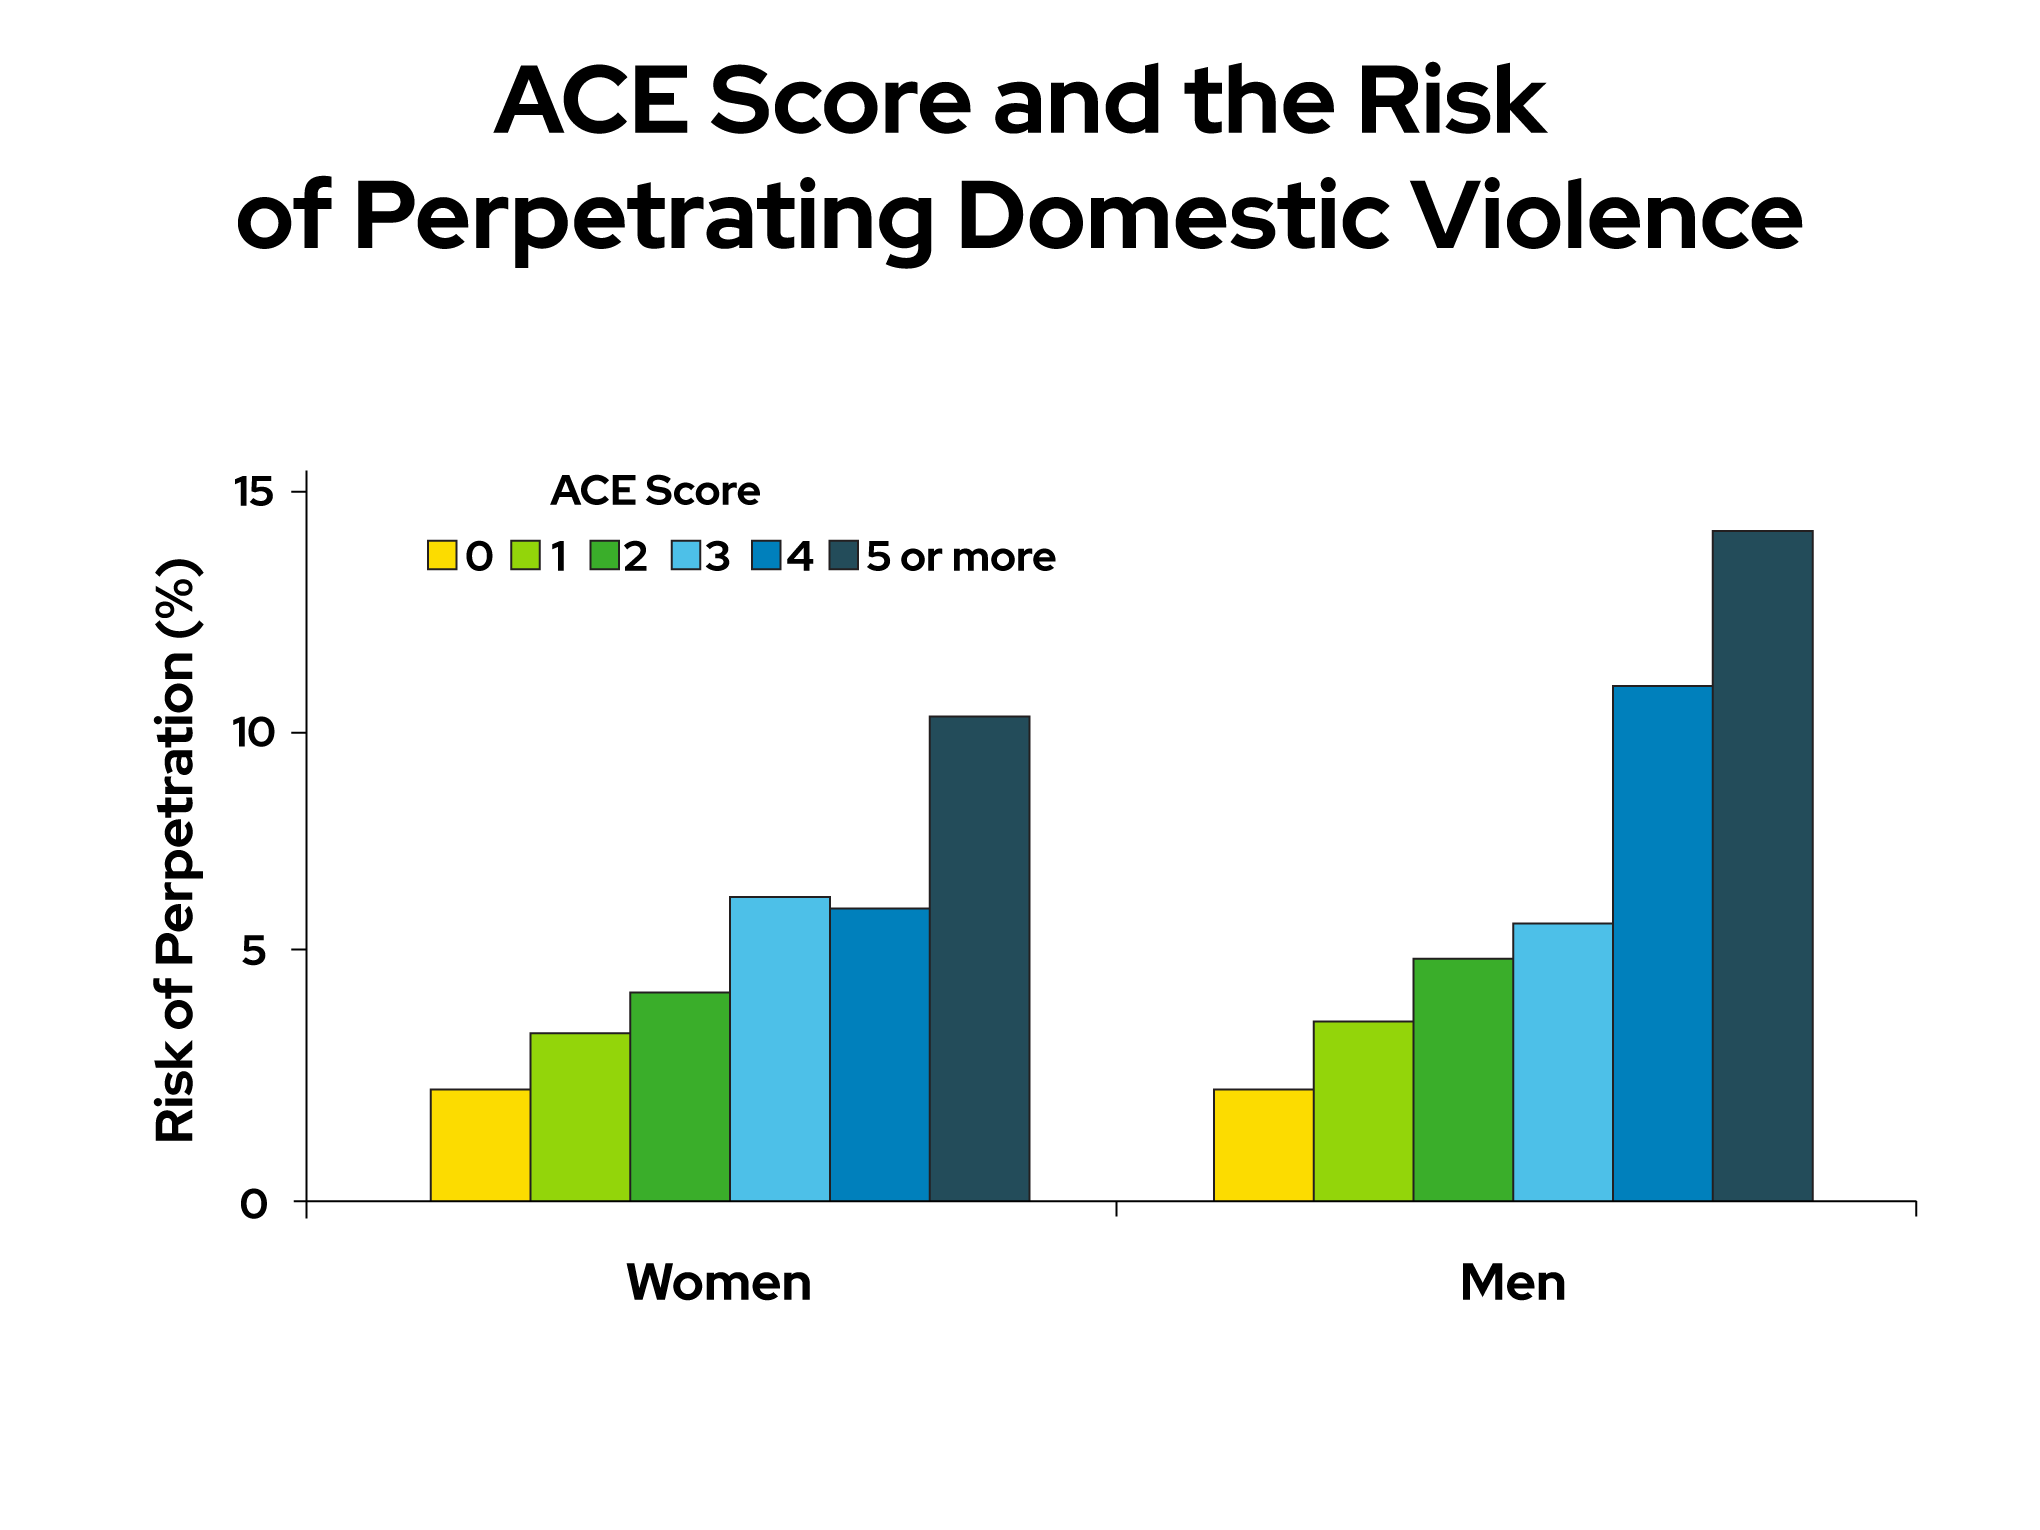 This graph comes from “The relationship of adverse childhood experiences to adult health, well being, social function and health care”, a book chapter by Drs. Vincent Felitti and Robert Anda, co-founders of the ACE Study, in “The Hidden Epidemic: The Impact of Early Life Trauma on Health and Disease.”